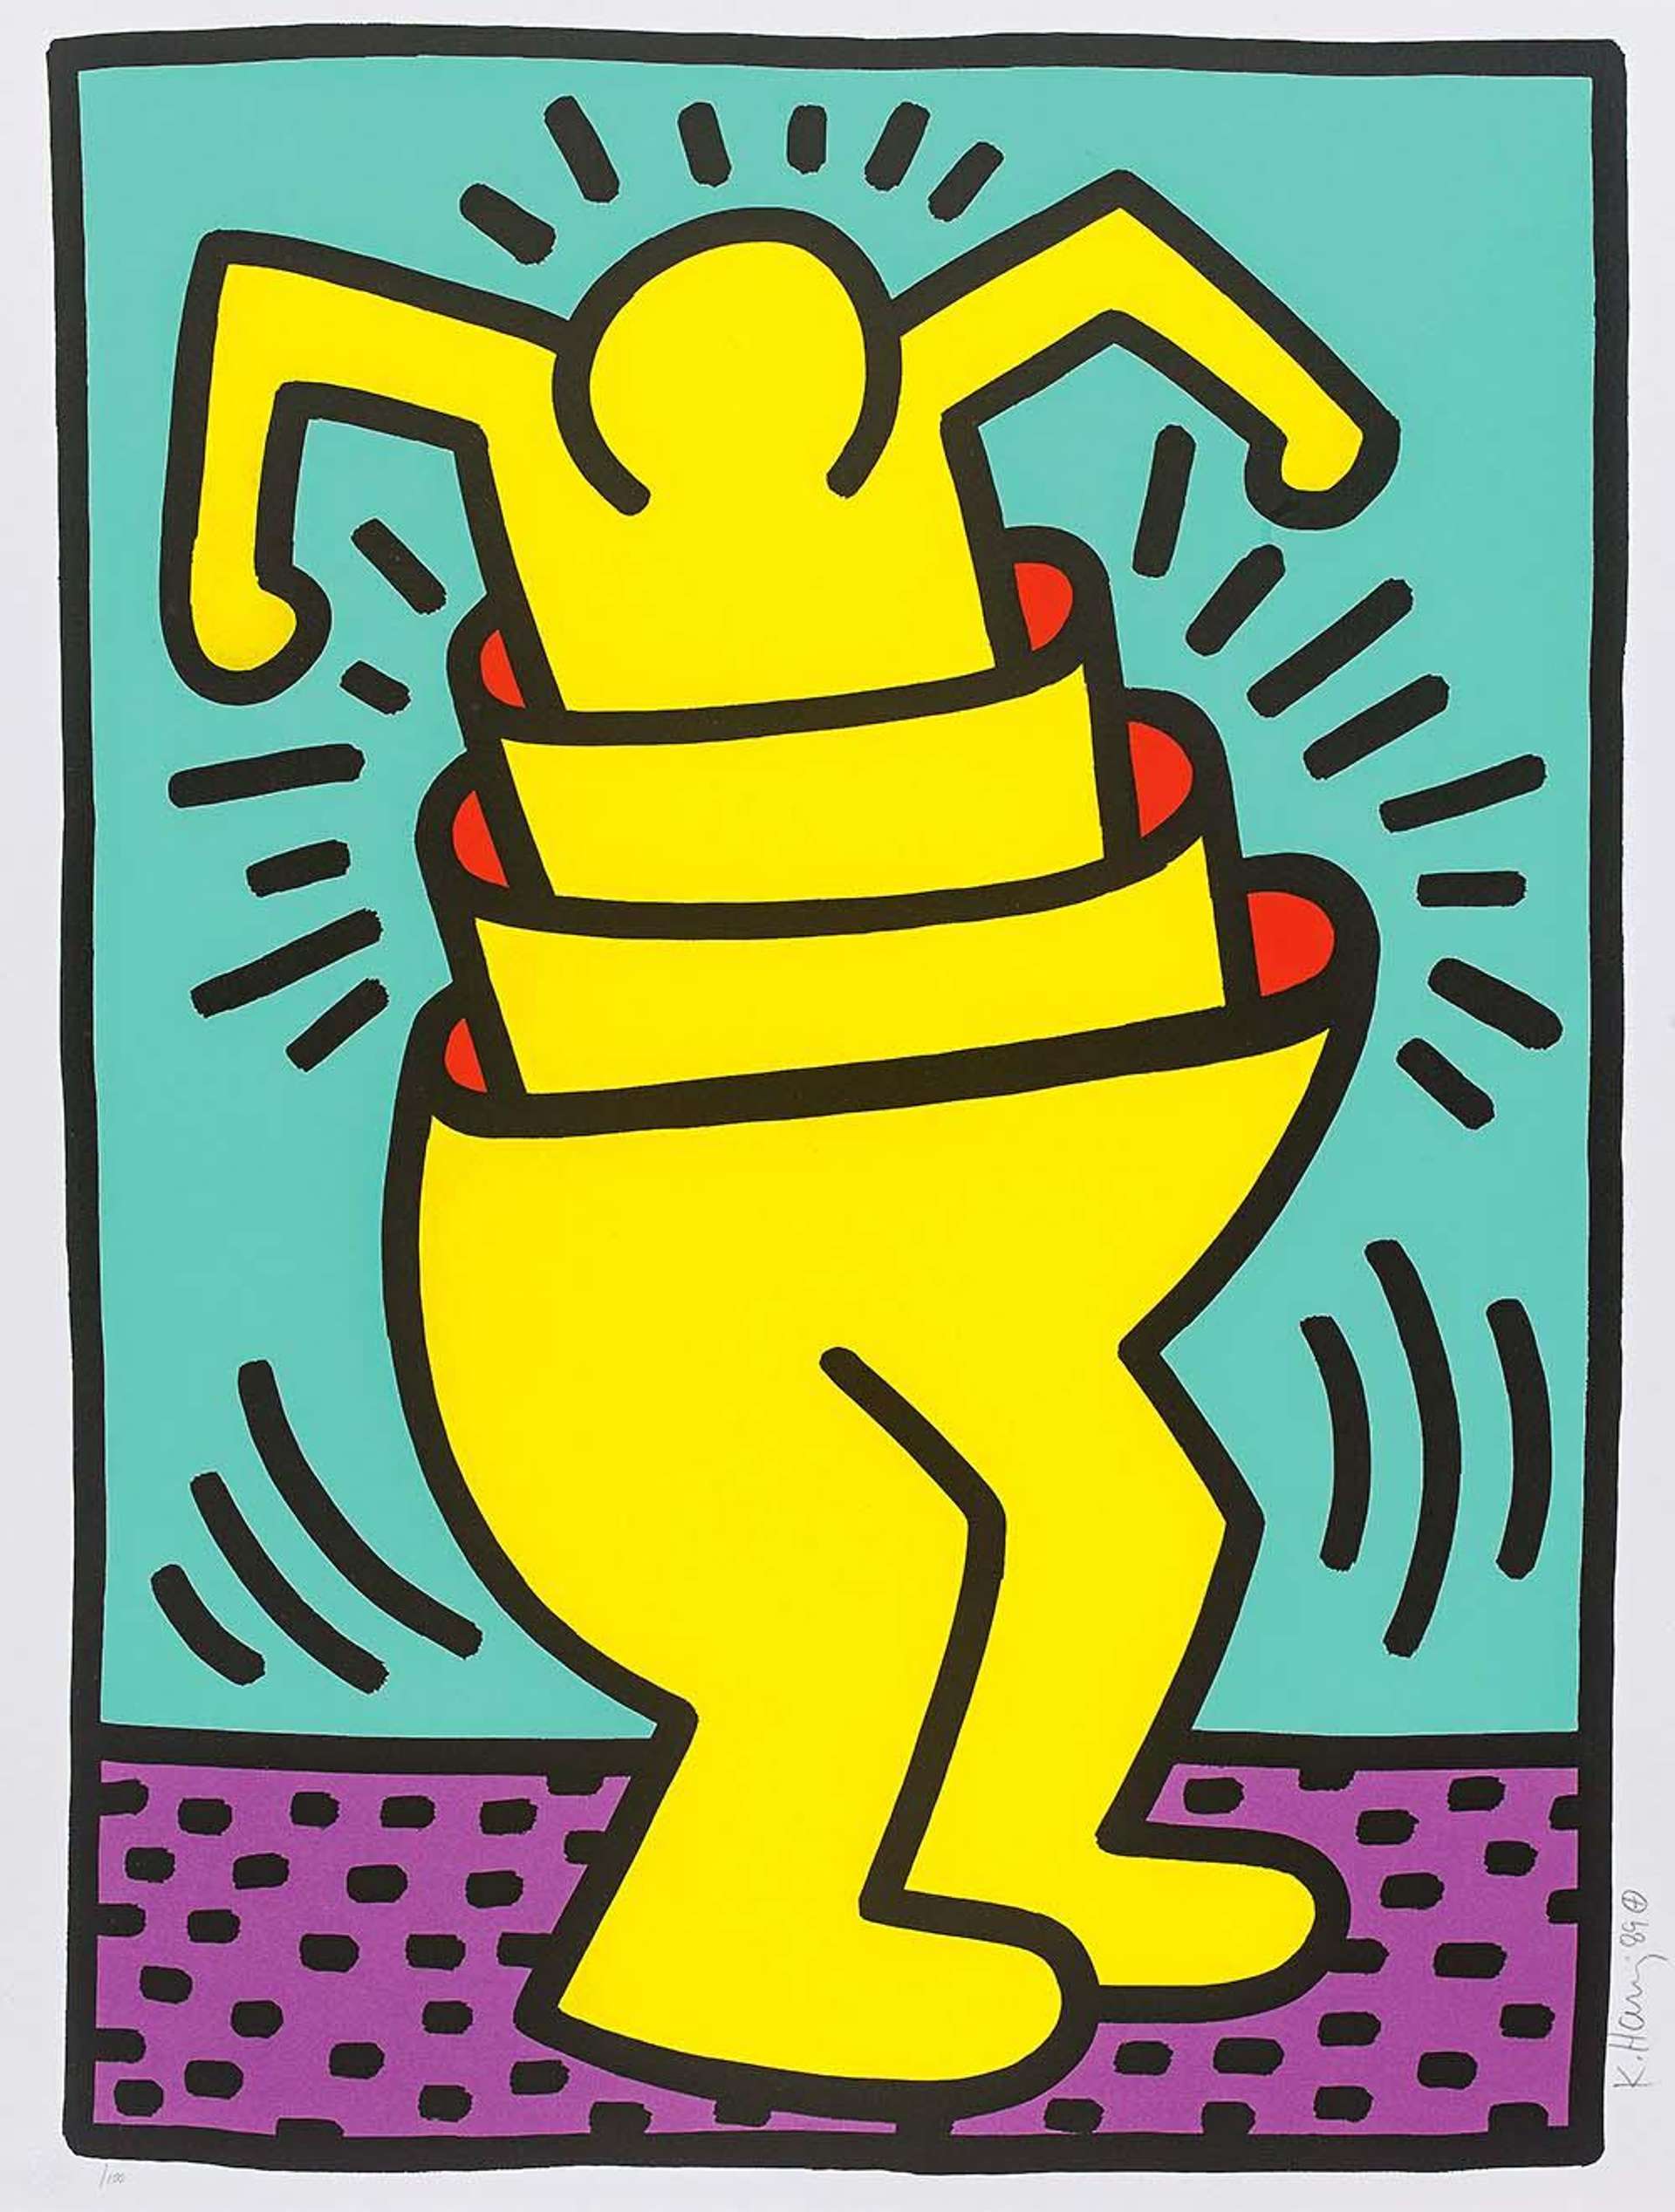 Ascending by Keith Haring